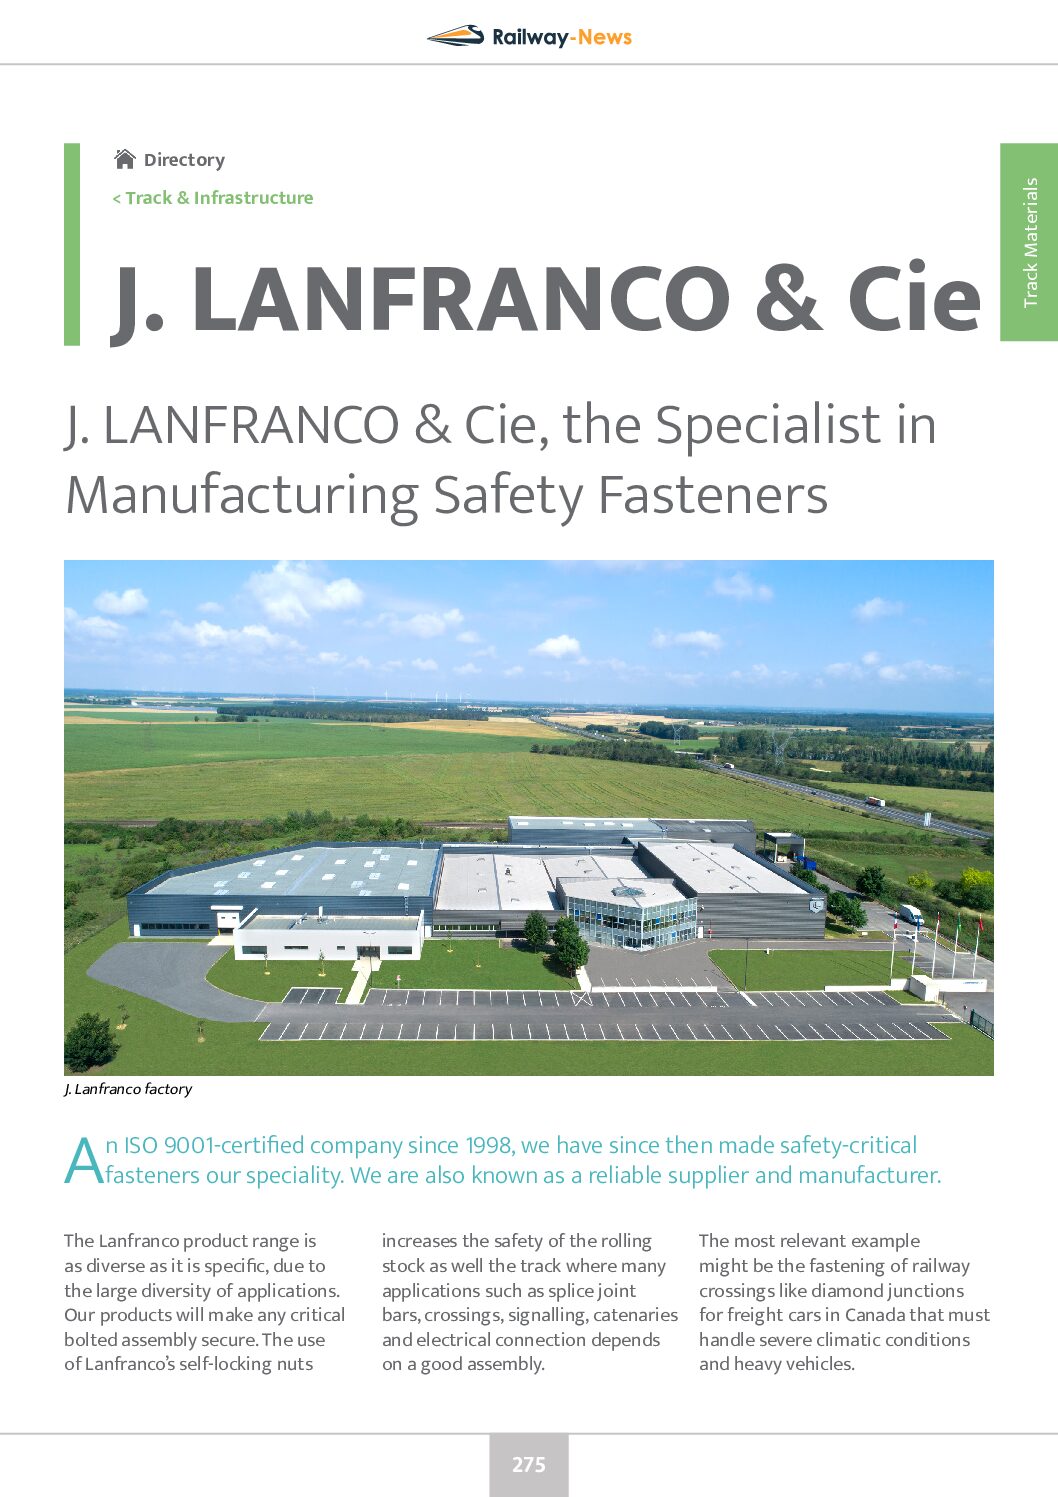 J. LANFRANCO, Specialist in Manufacturing Safety Fasteners